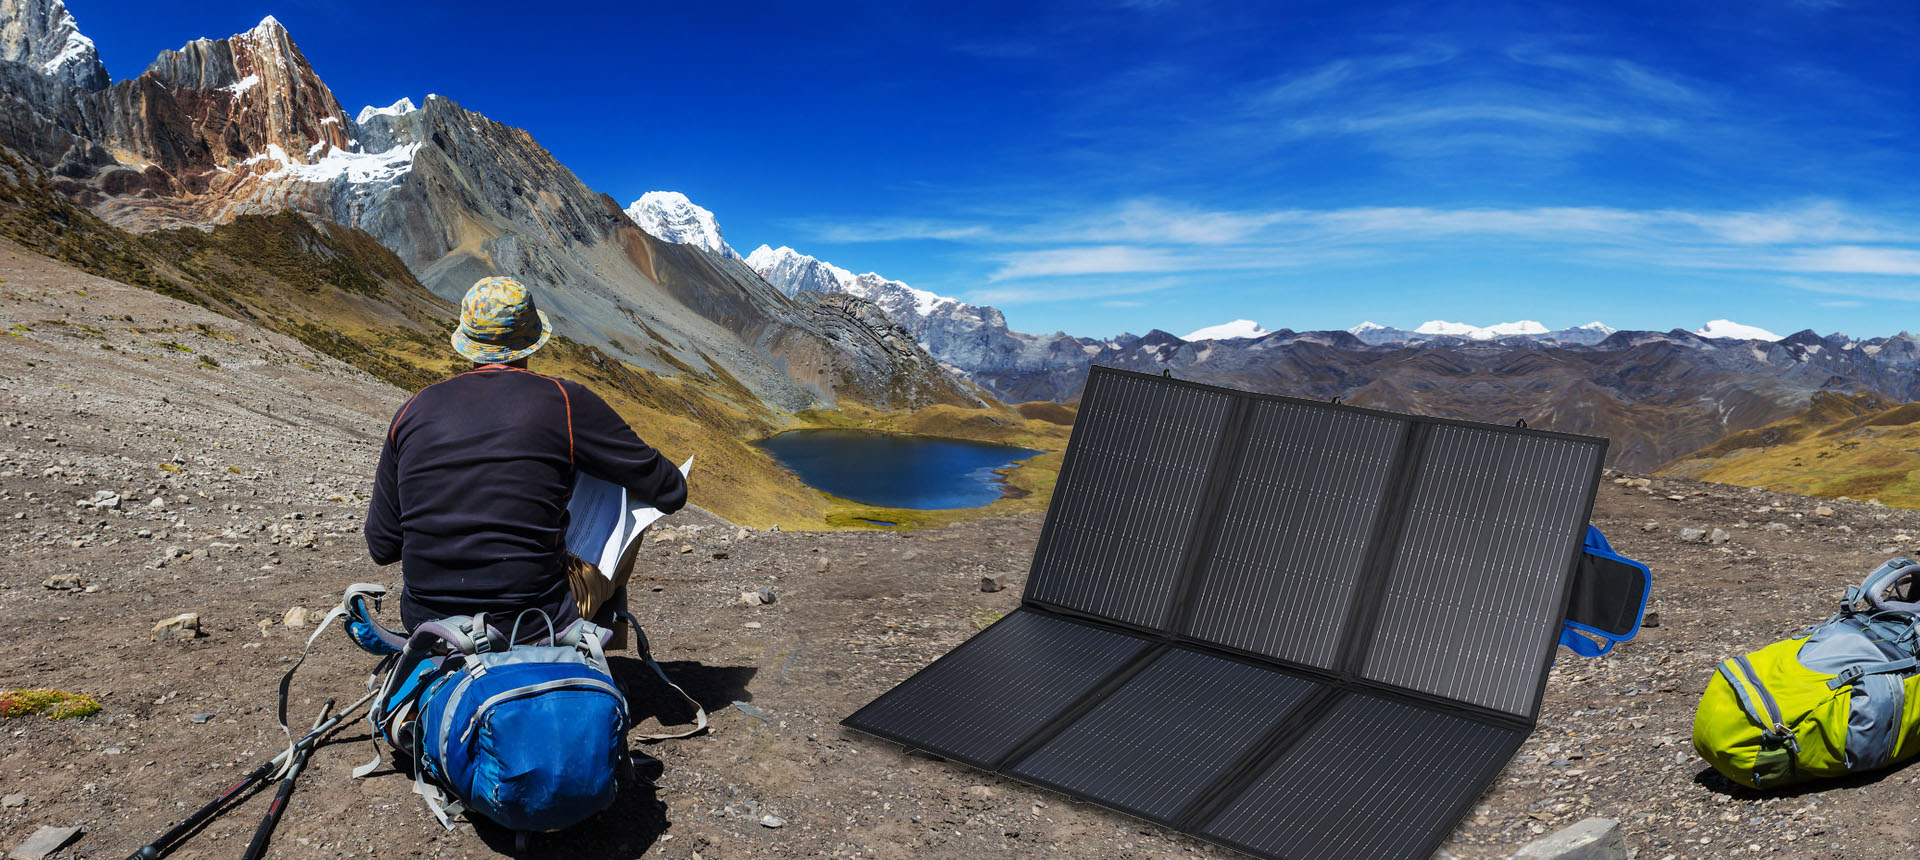  Portable solar charging pack